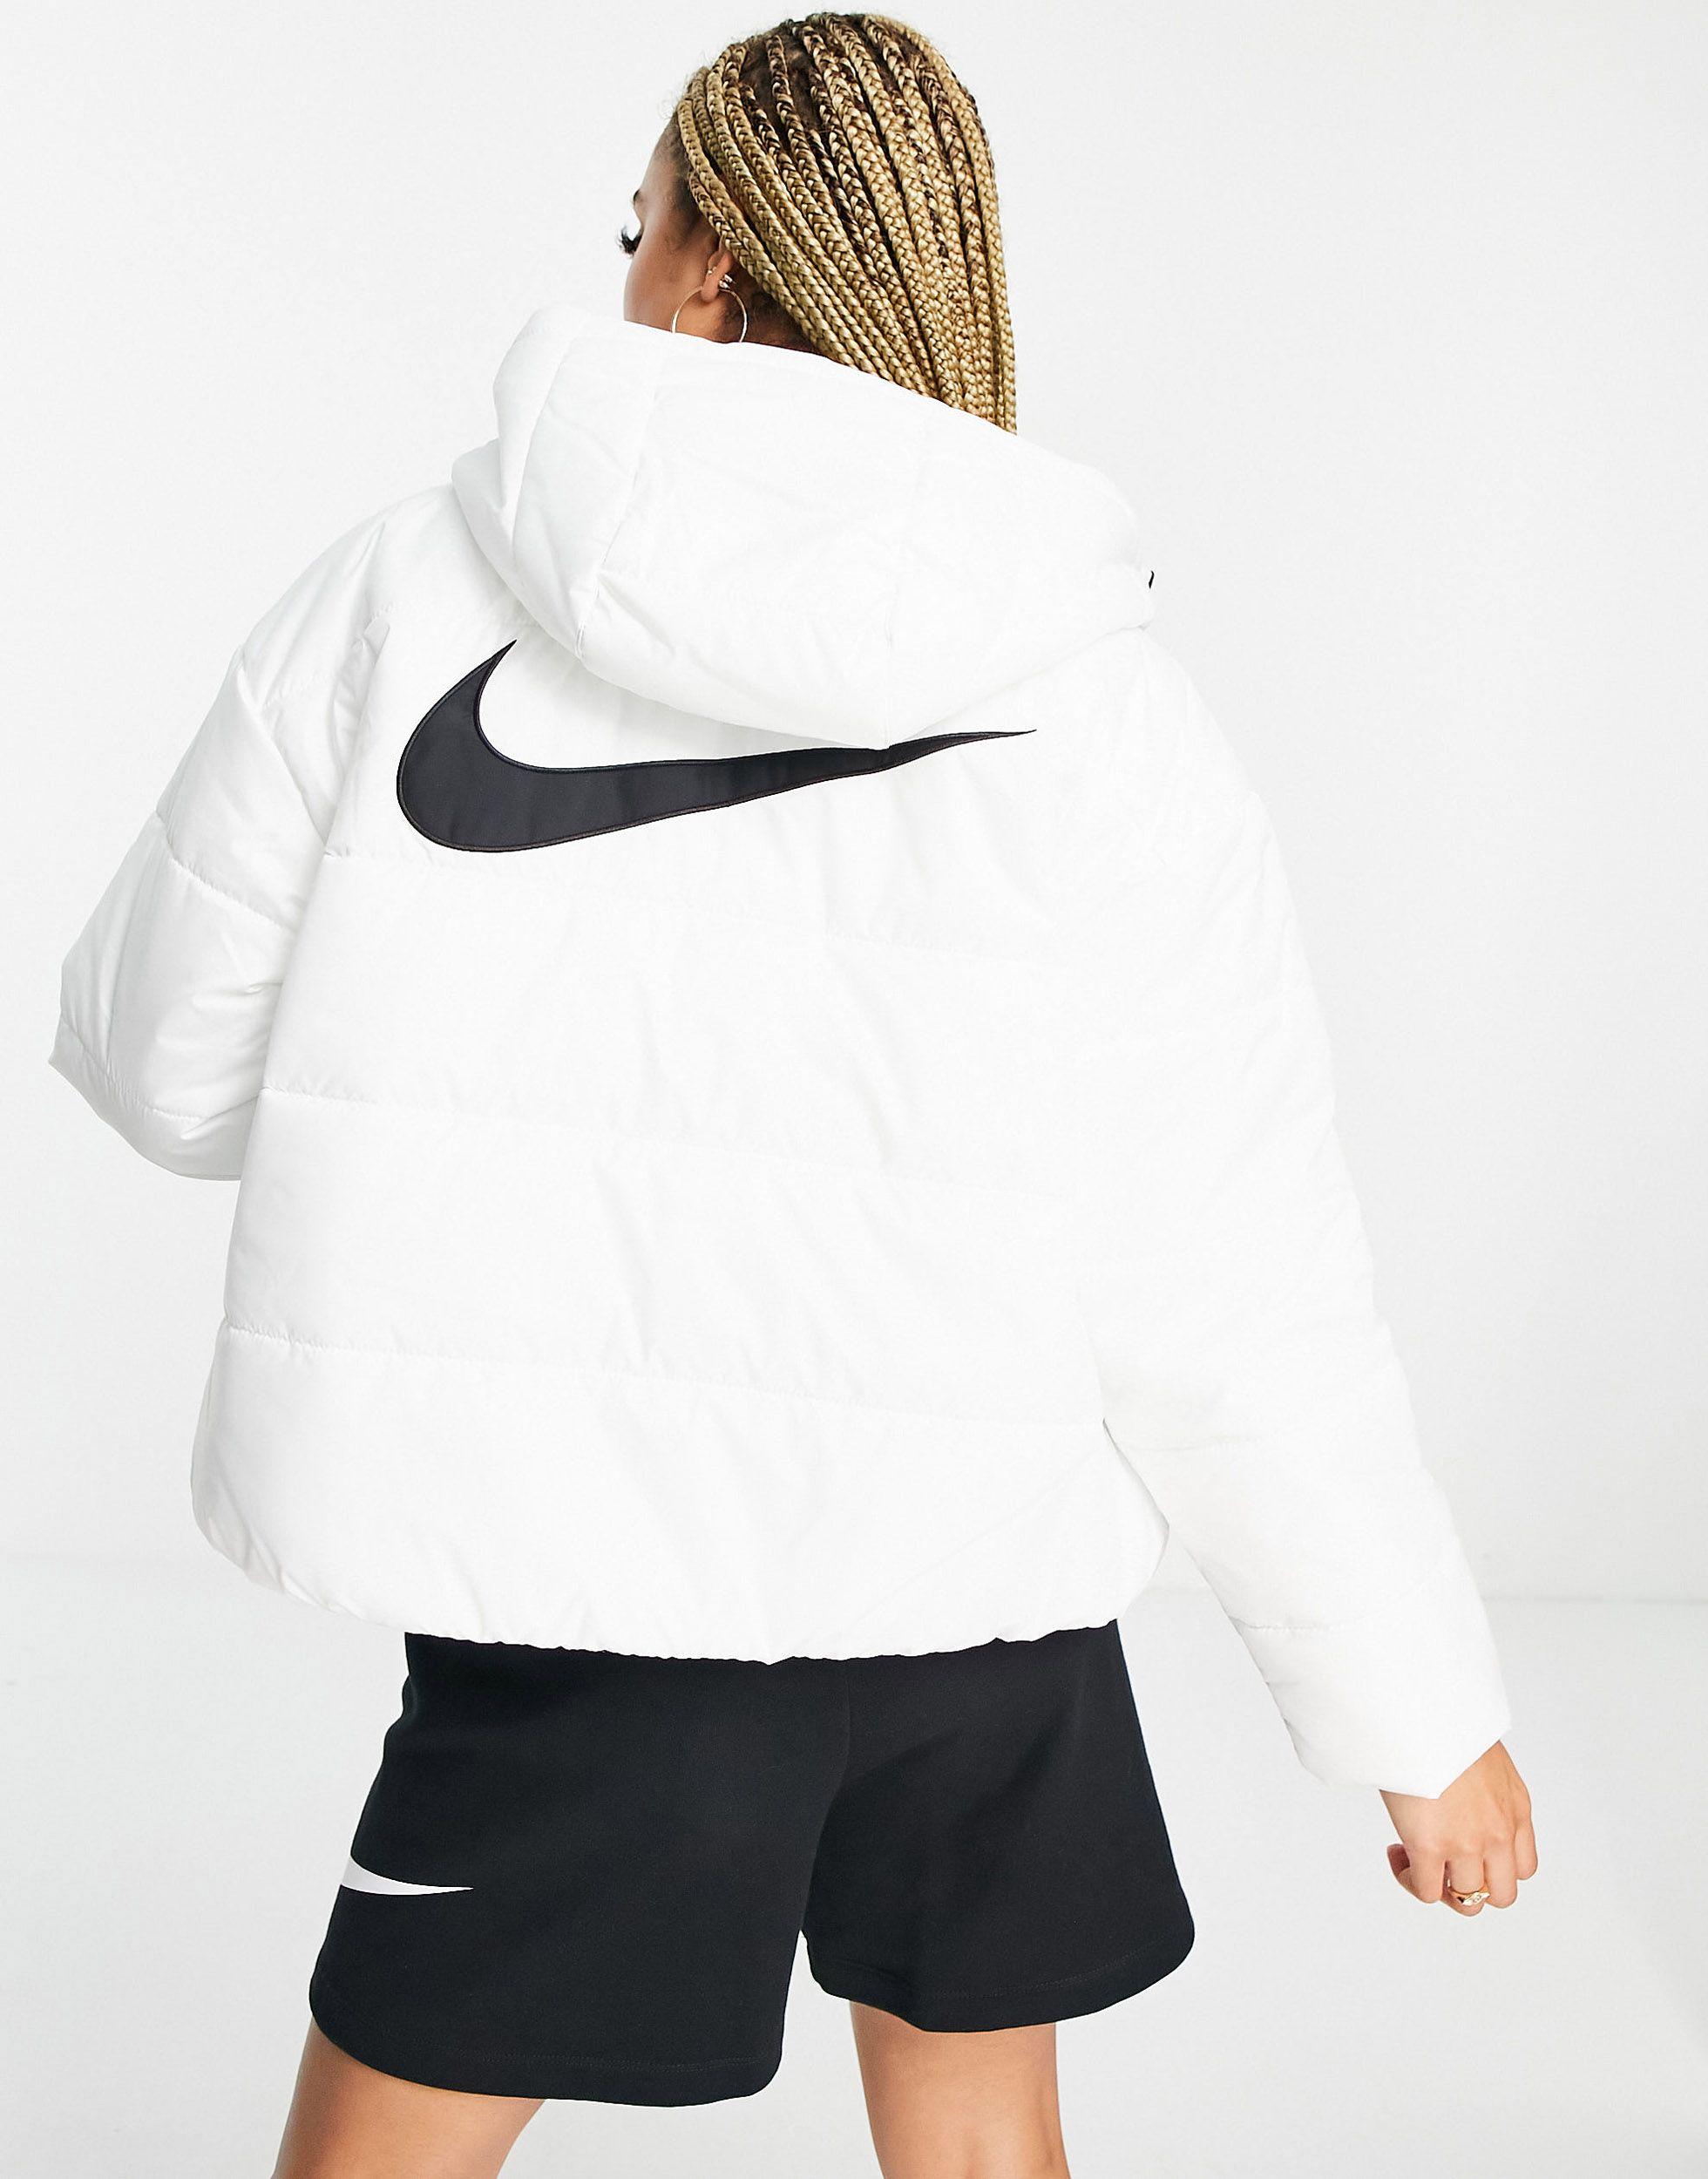 Nike Classic Padded Jacket With Hood in White | Lyst